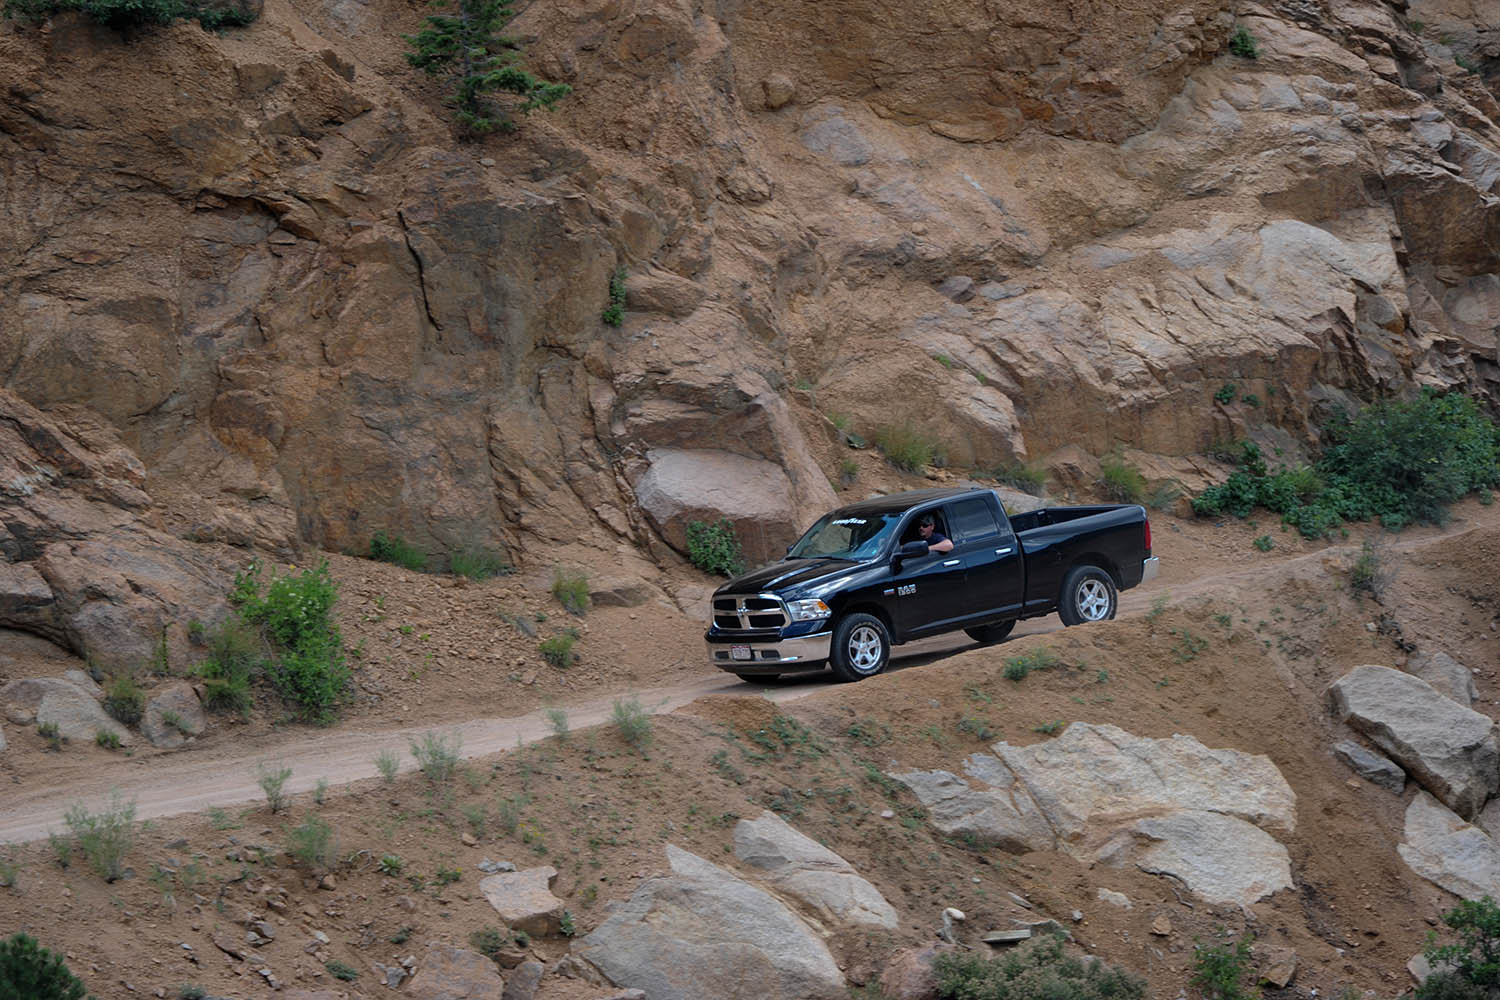 Ram pickup truck with Goodyear all-terrain tires on mountain road